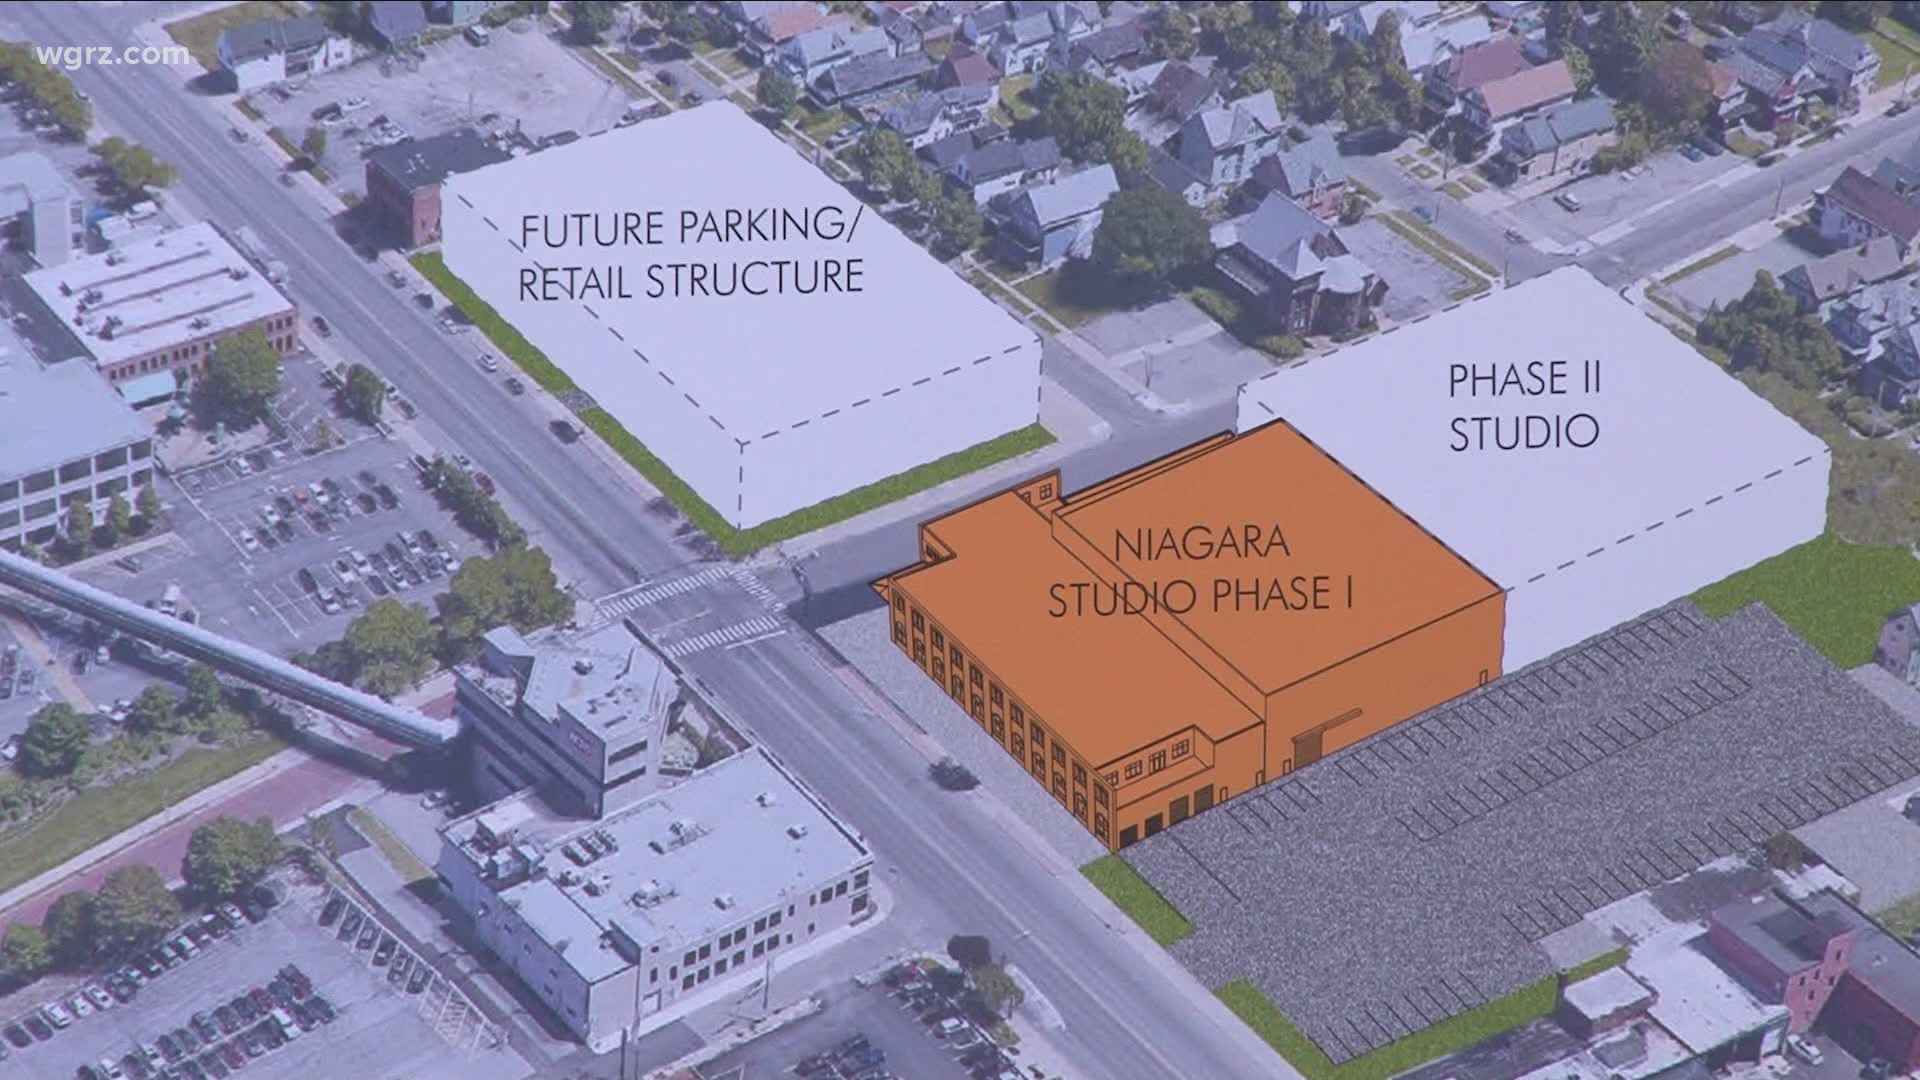 It'll include two 20-thousand square foot stages and a 70-thousand square foot office and support space all across from Rich's here on Niagara Street.